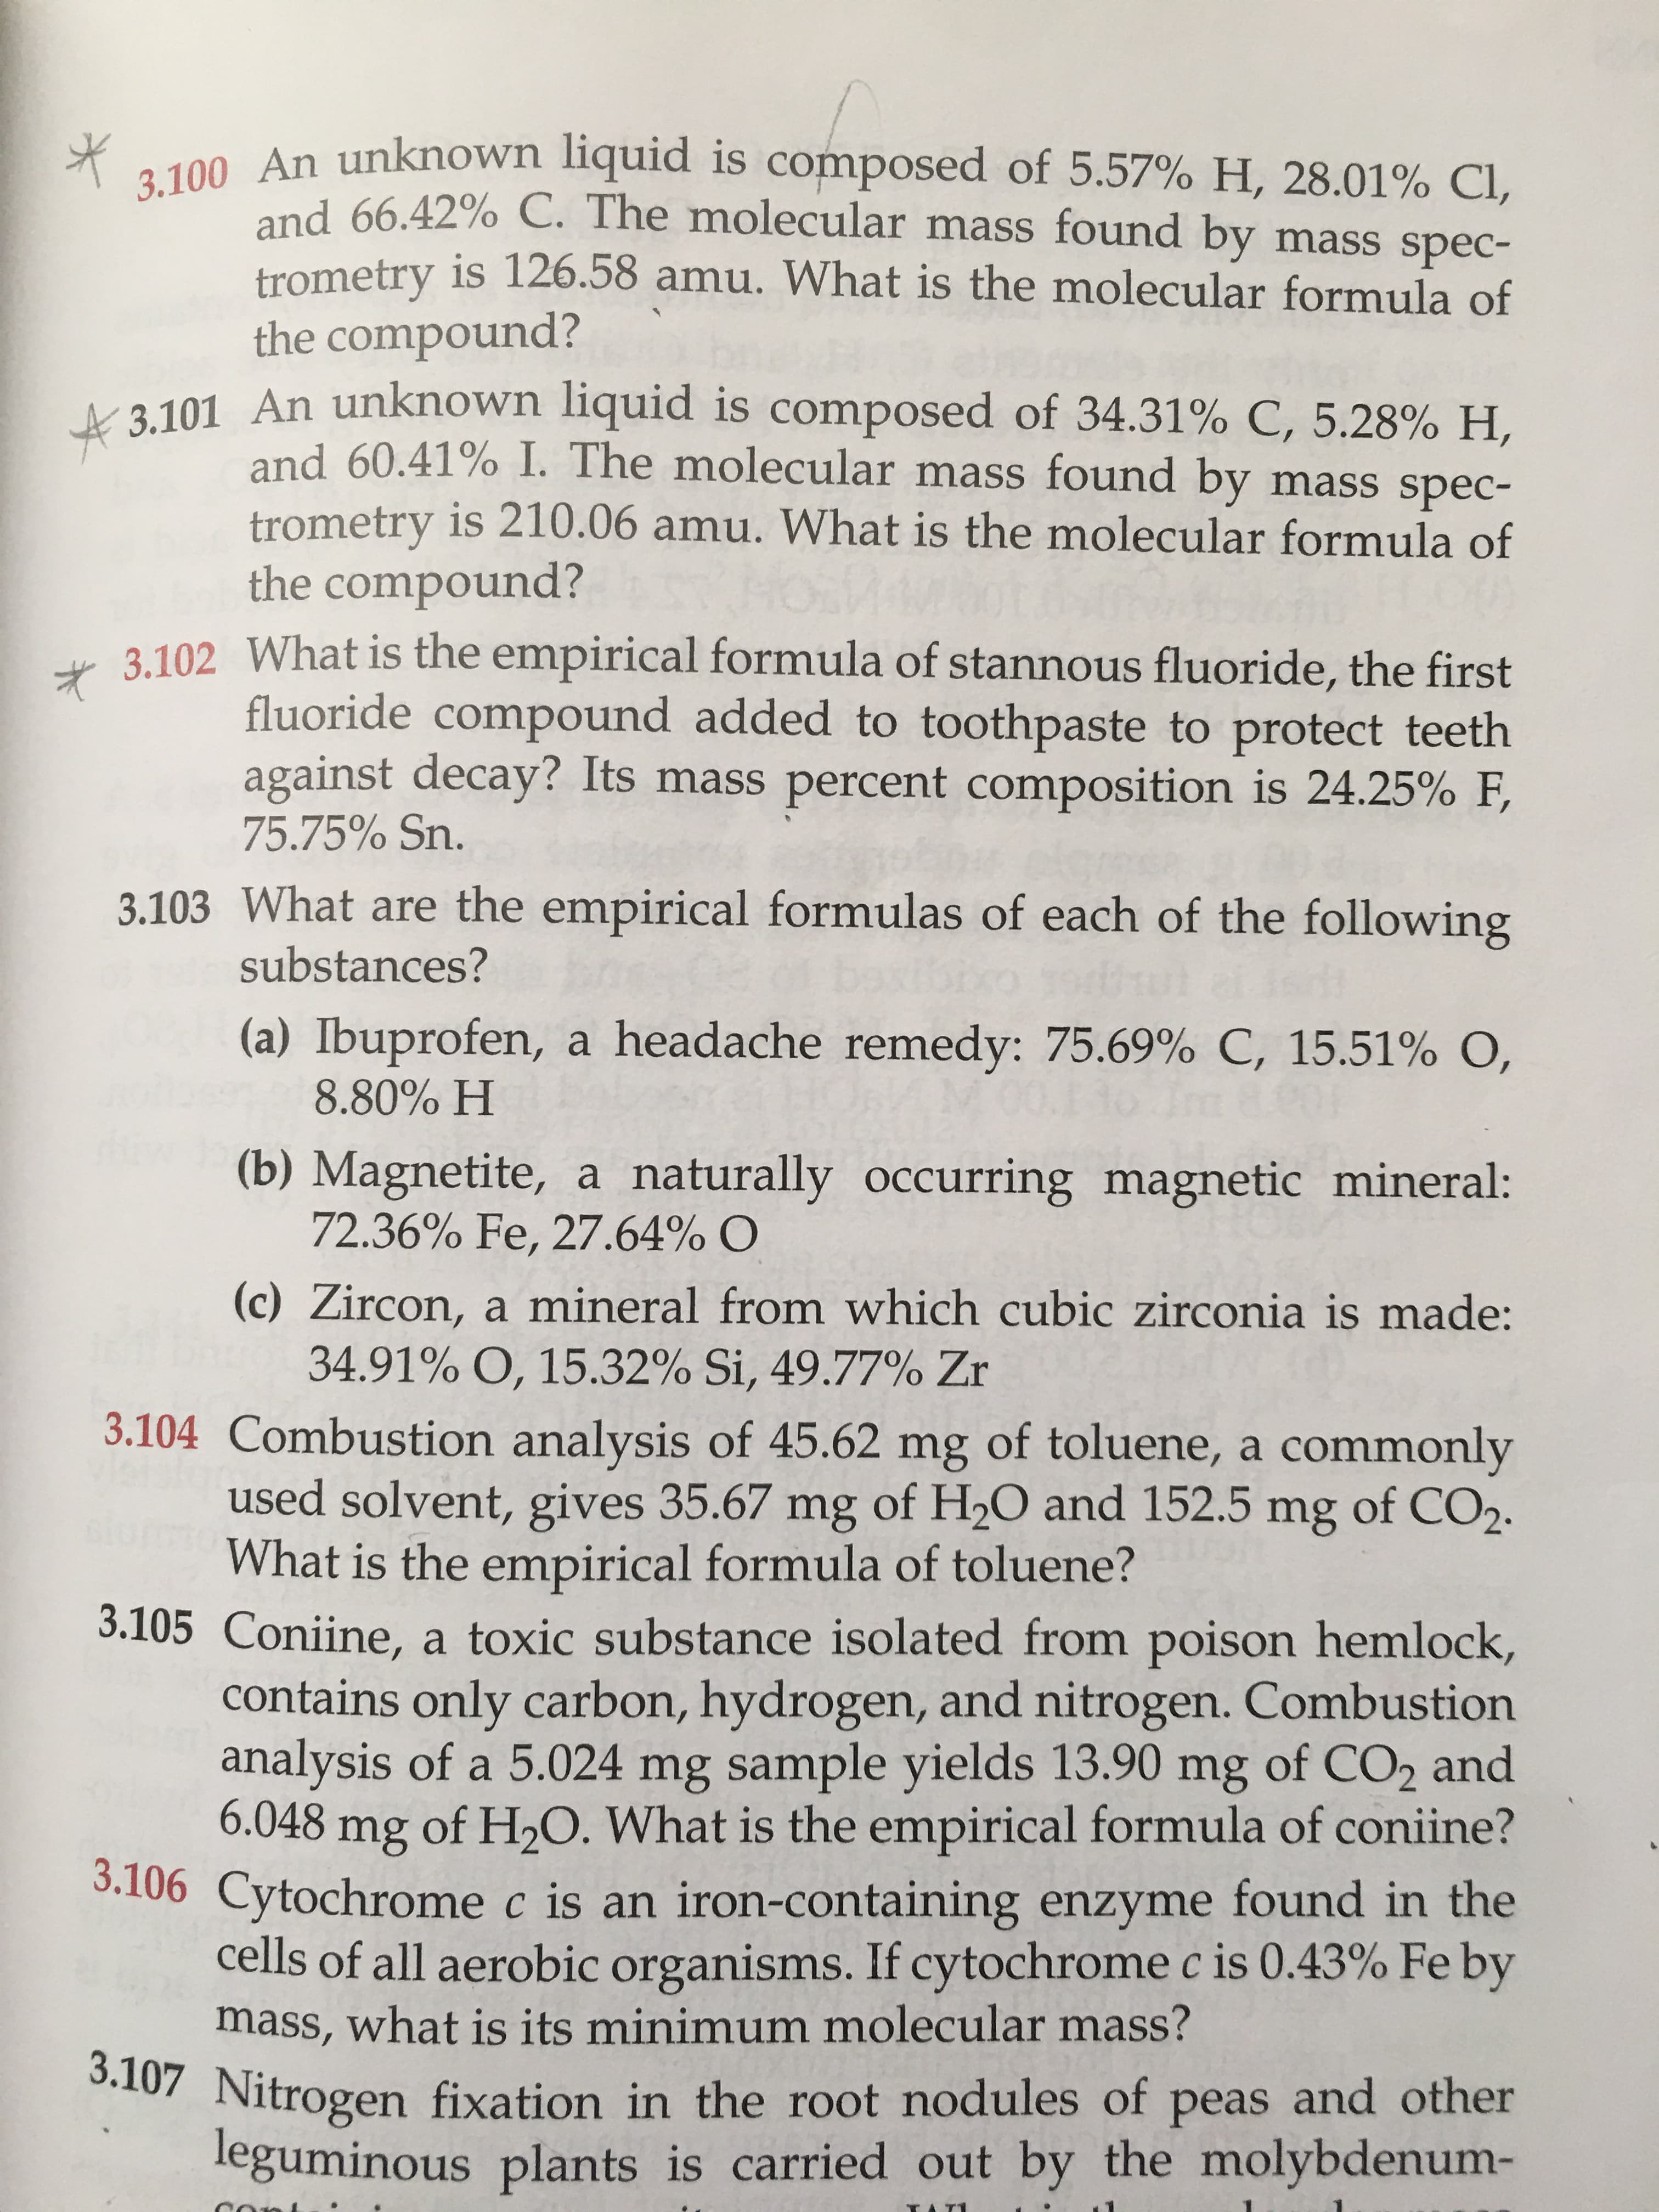 An unknown liquid is composed of 34.31% C, 5.28% H,
and 60.41% I. The molecular mass found by mass spec-
trometry is 210.06 amu. What is the molecular formula of
the compound?
